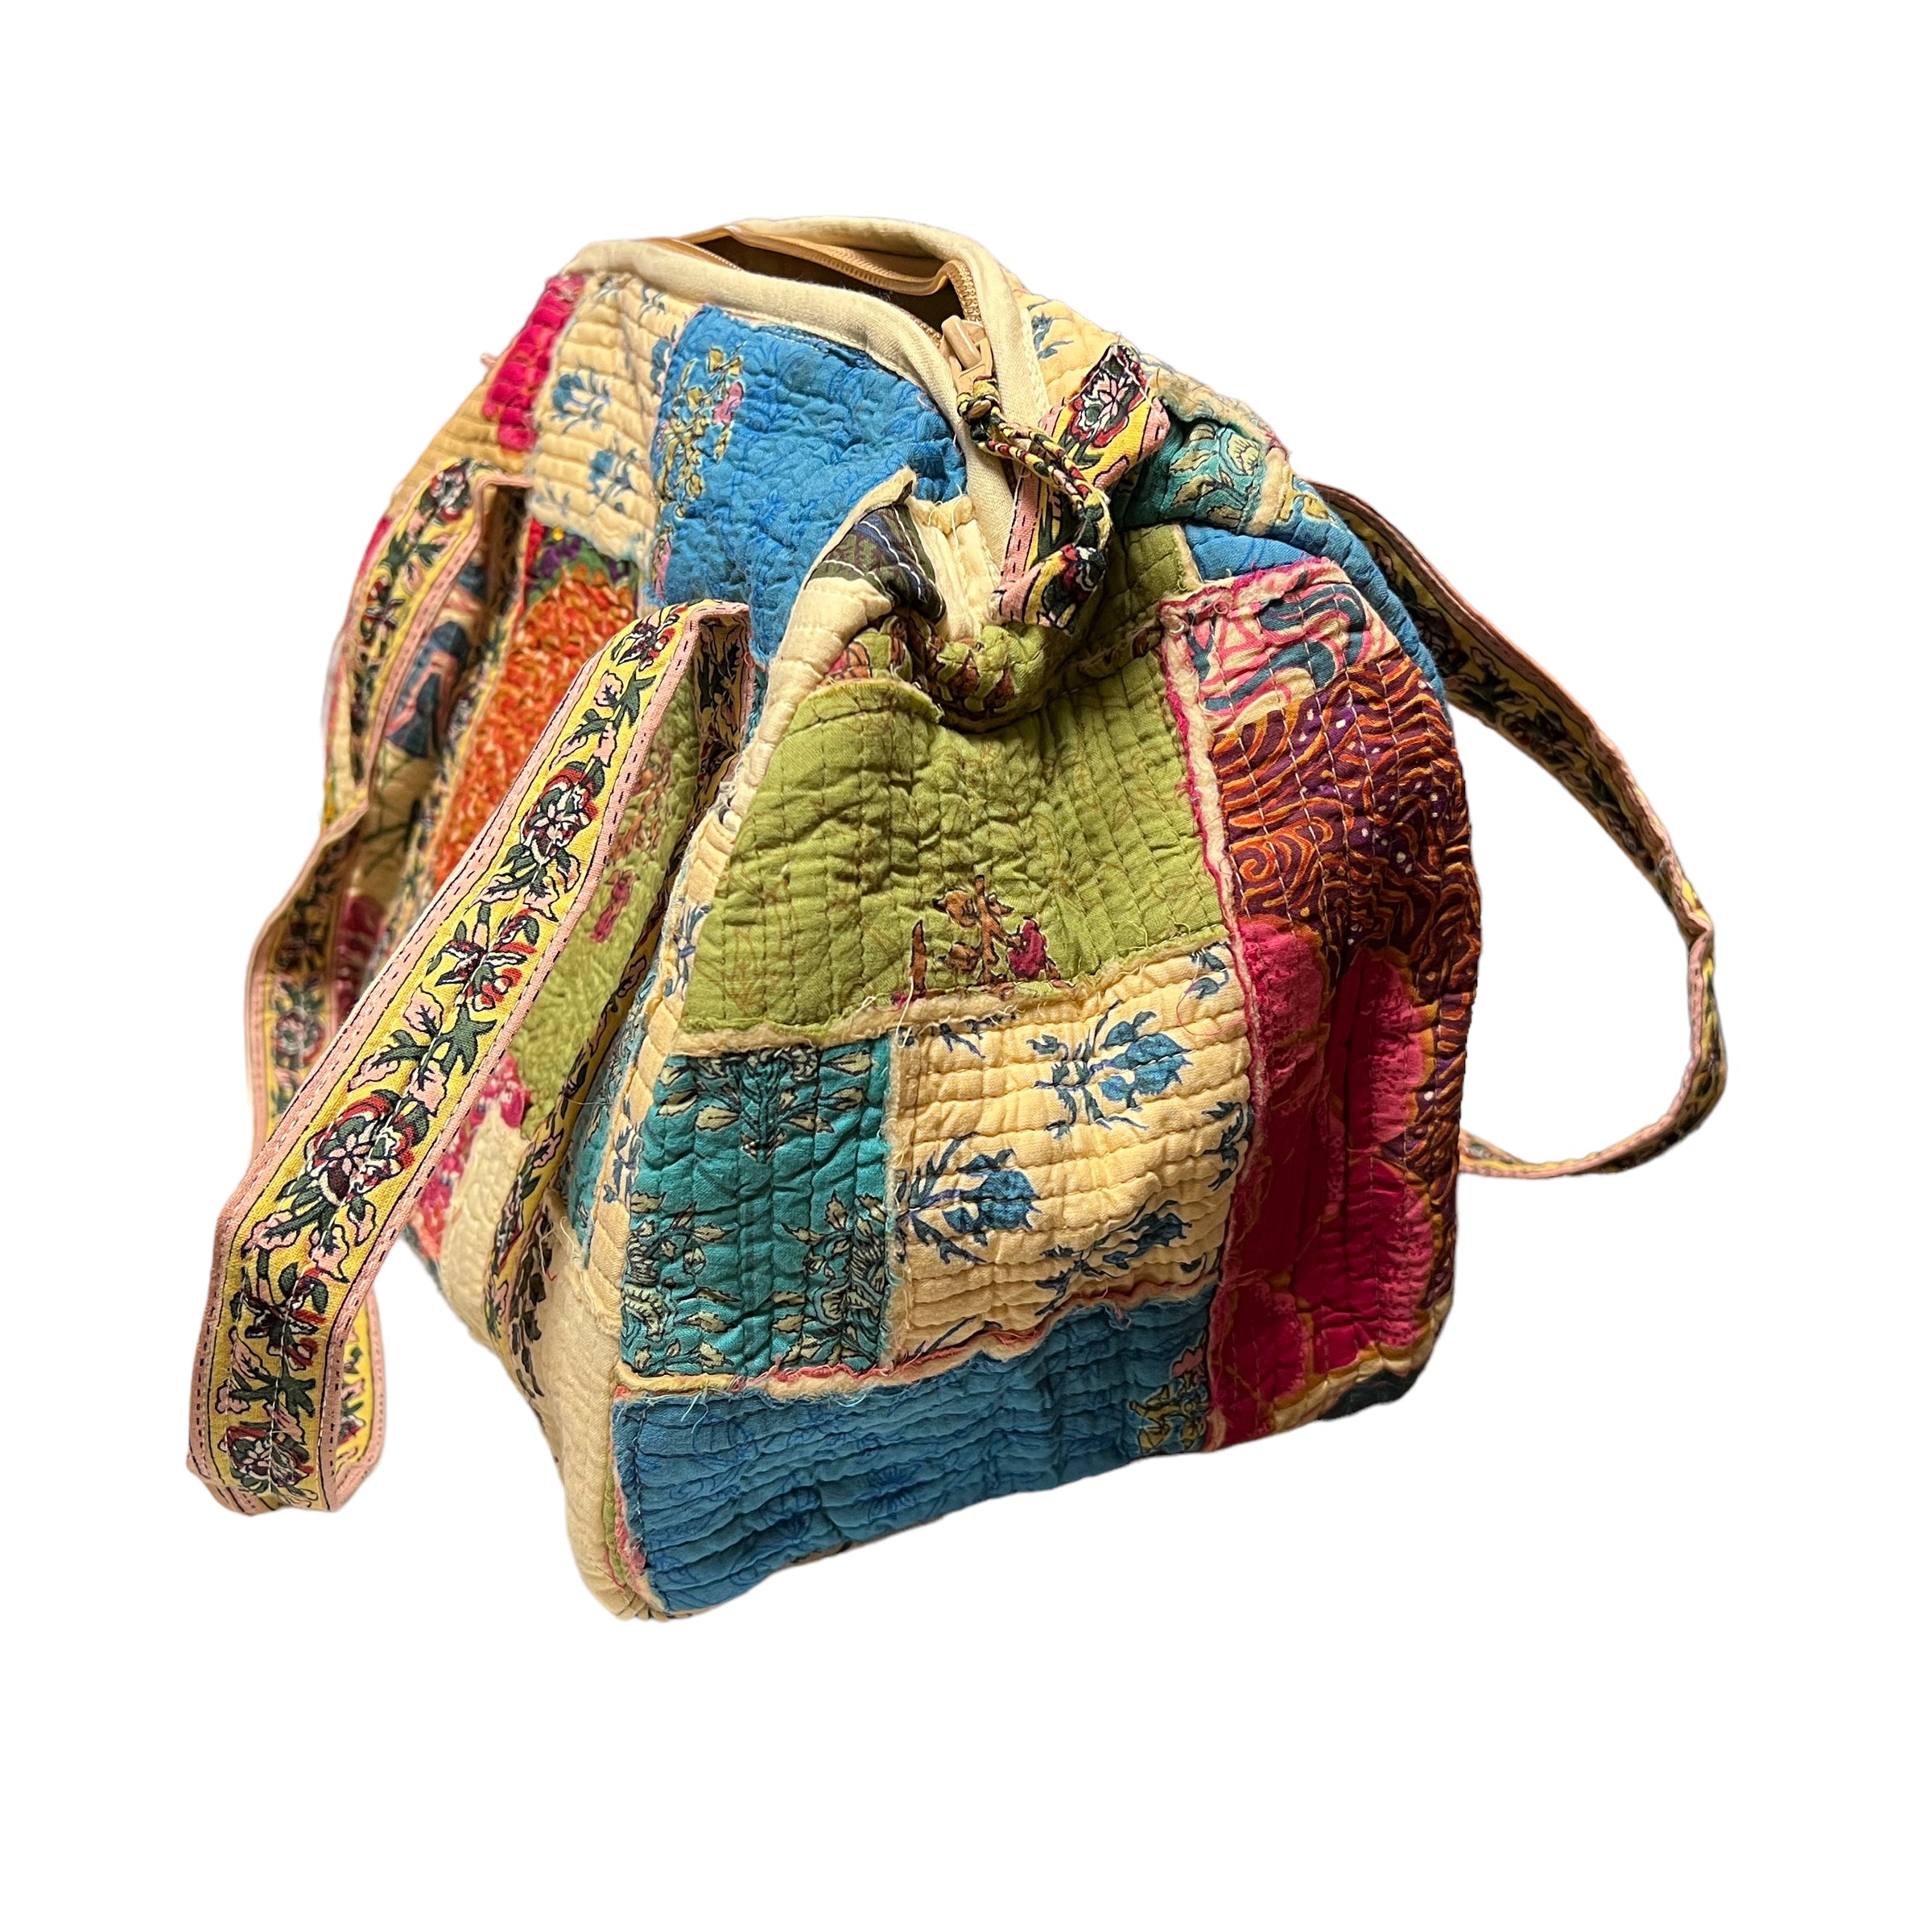 Patchwork Bags - Vintage India NYC